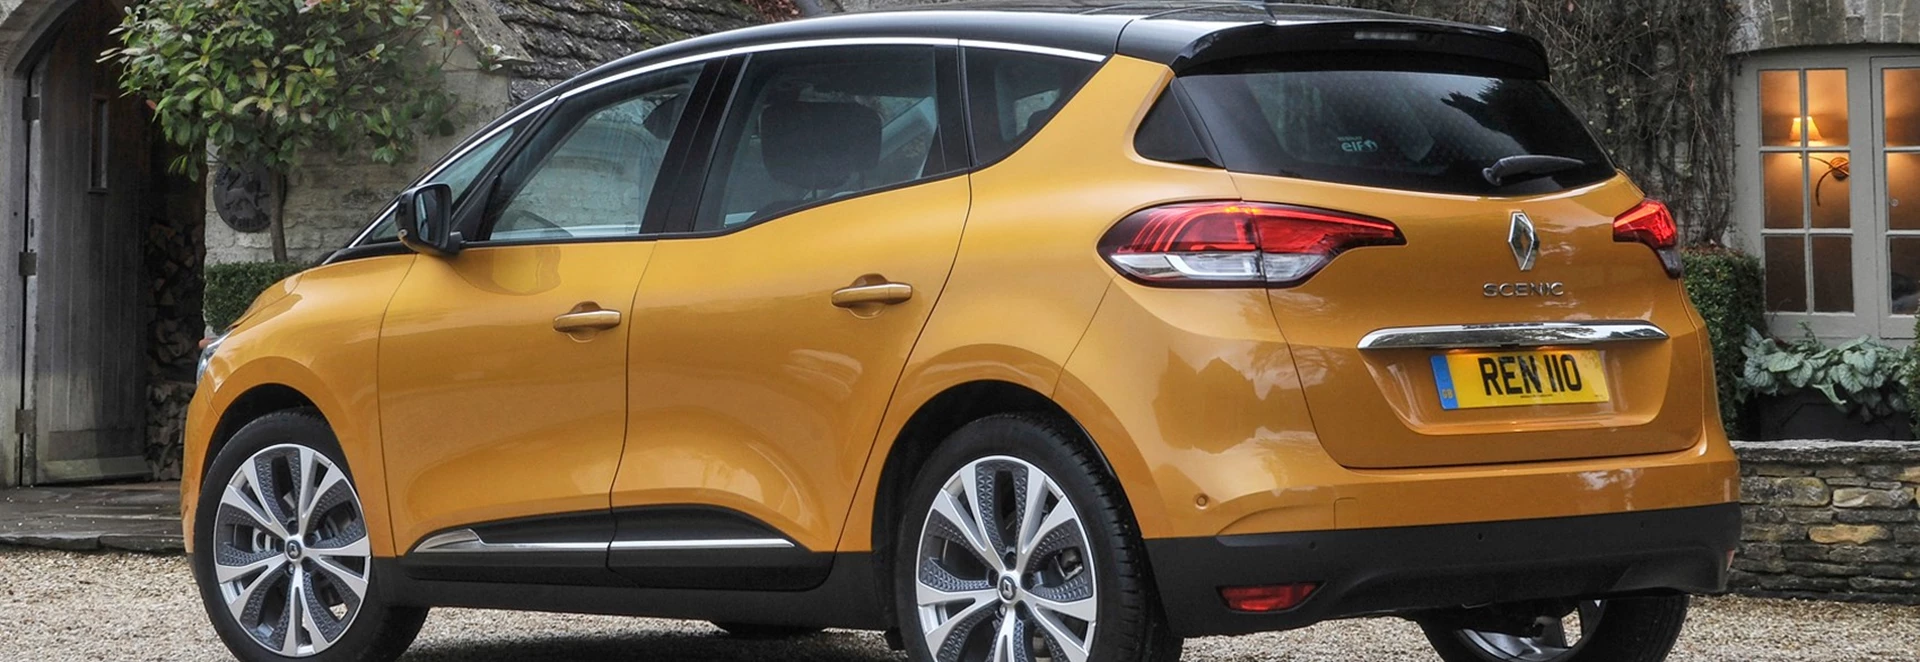 Renault Scenic Dynamique S Nav dCi 110 MPV review 